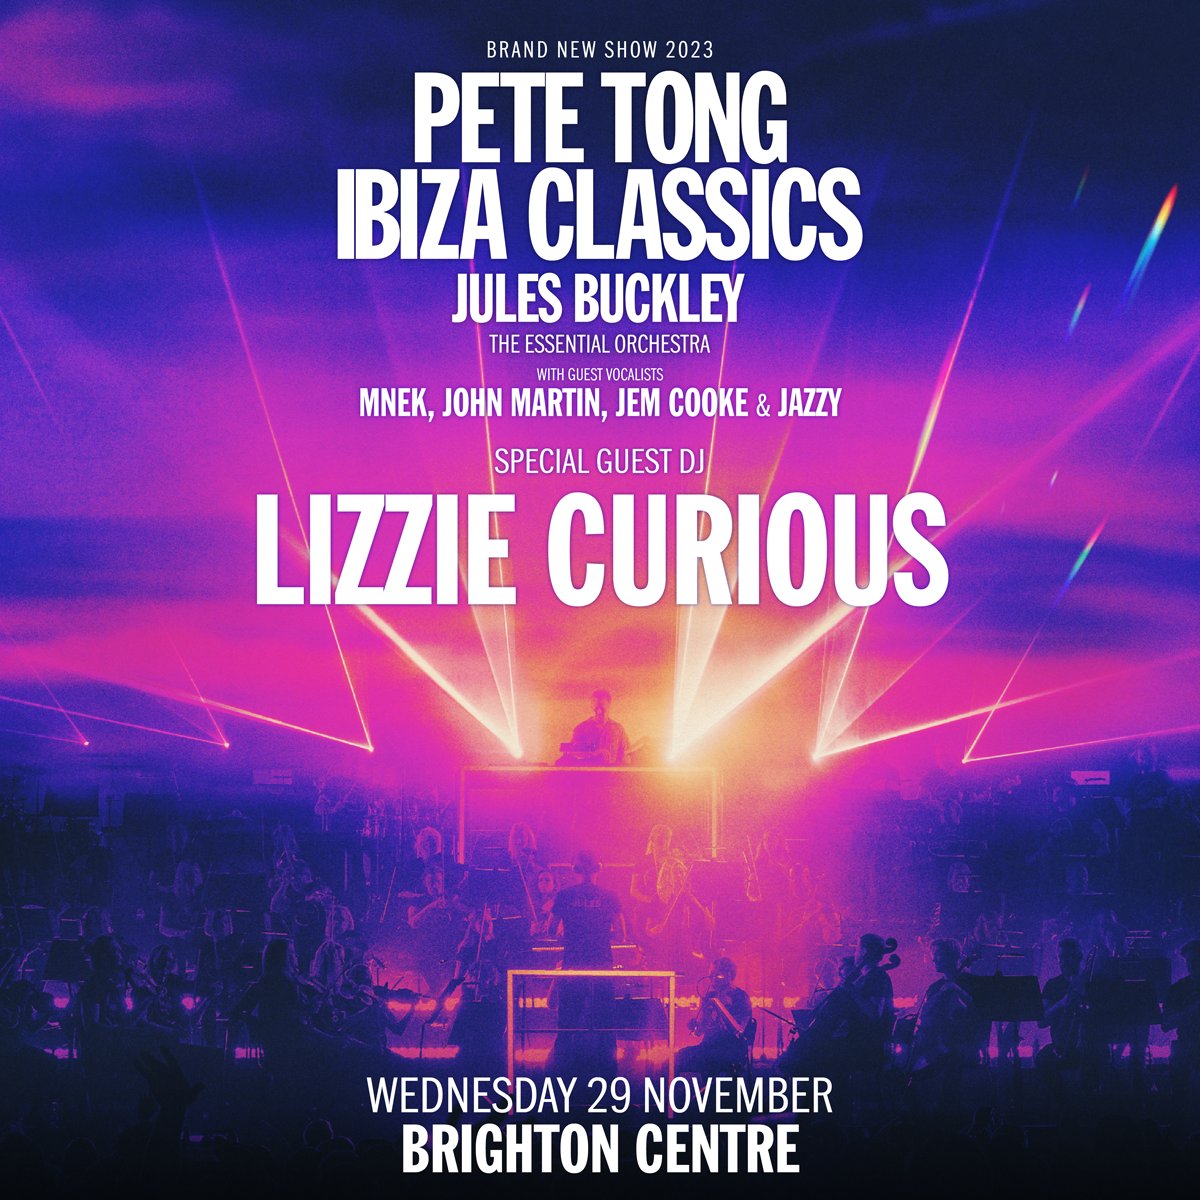 HUGE NEWS 🎶 Thrilled to announce I'm @petetong's Special Guest DJ for @IbizaClassics_ at the Brighton Centre on 29 Nov!! TICKETS: ticketmaster.co.uk/event/1F005D85… #IbizaClassics